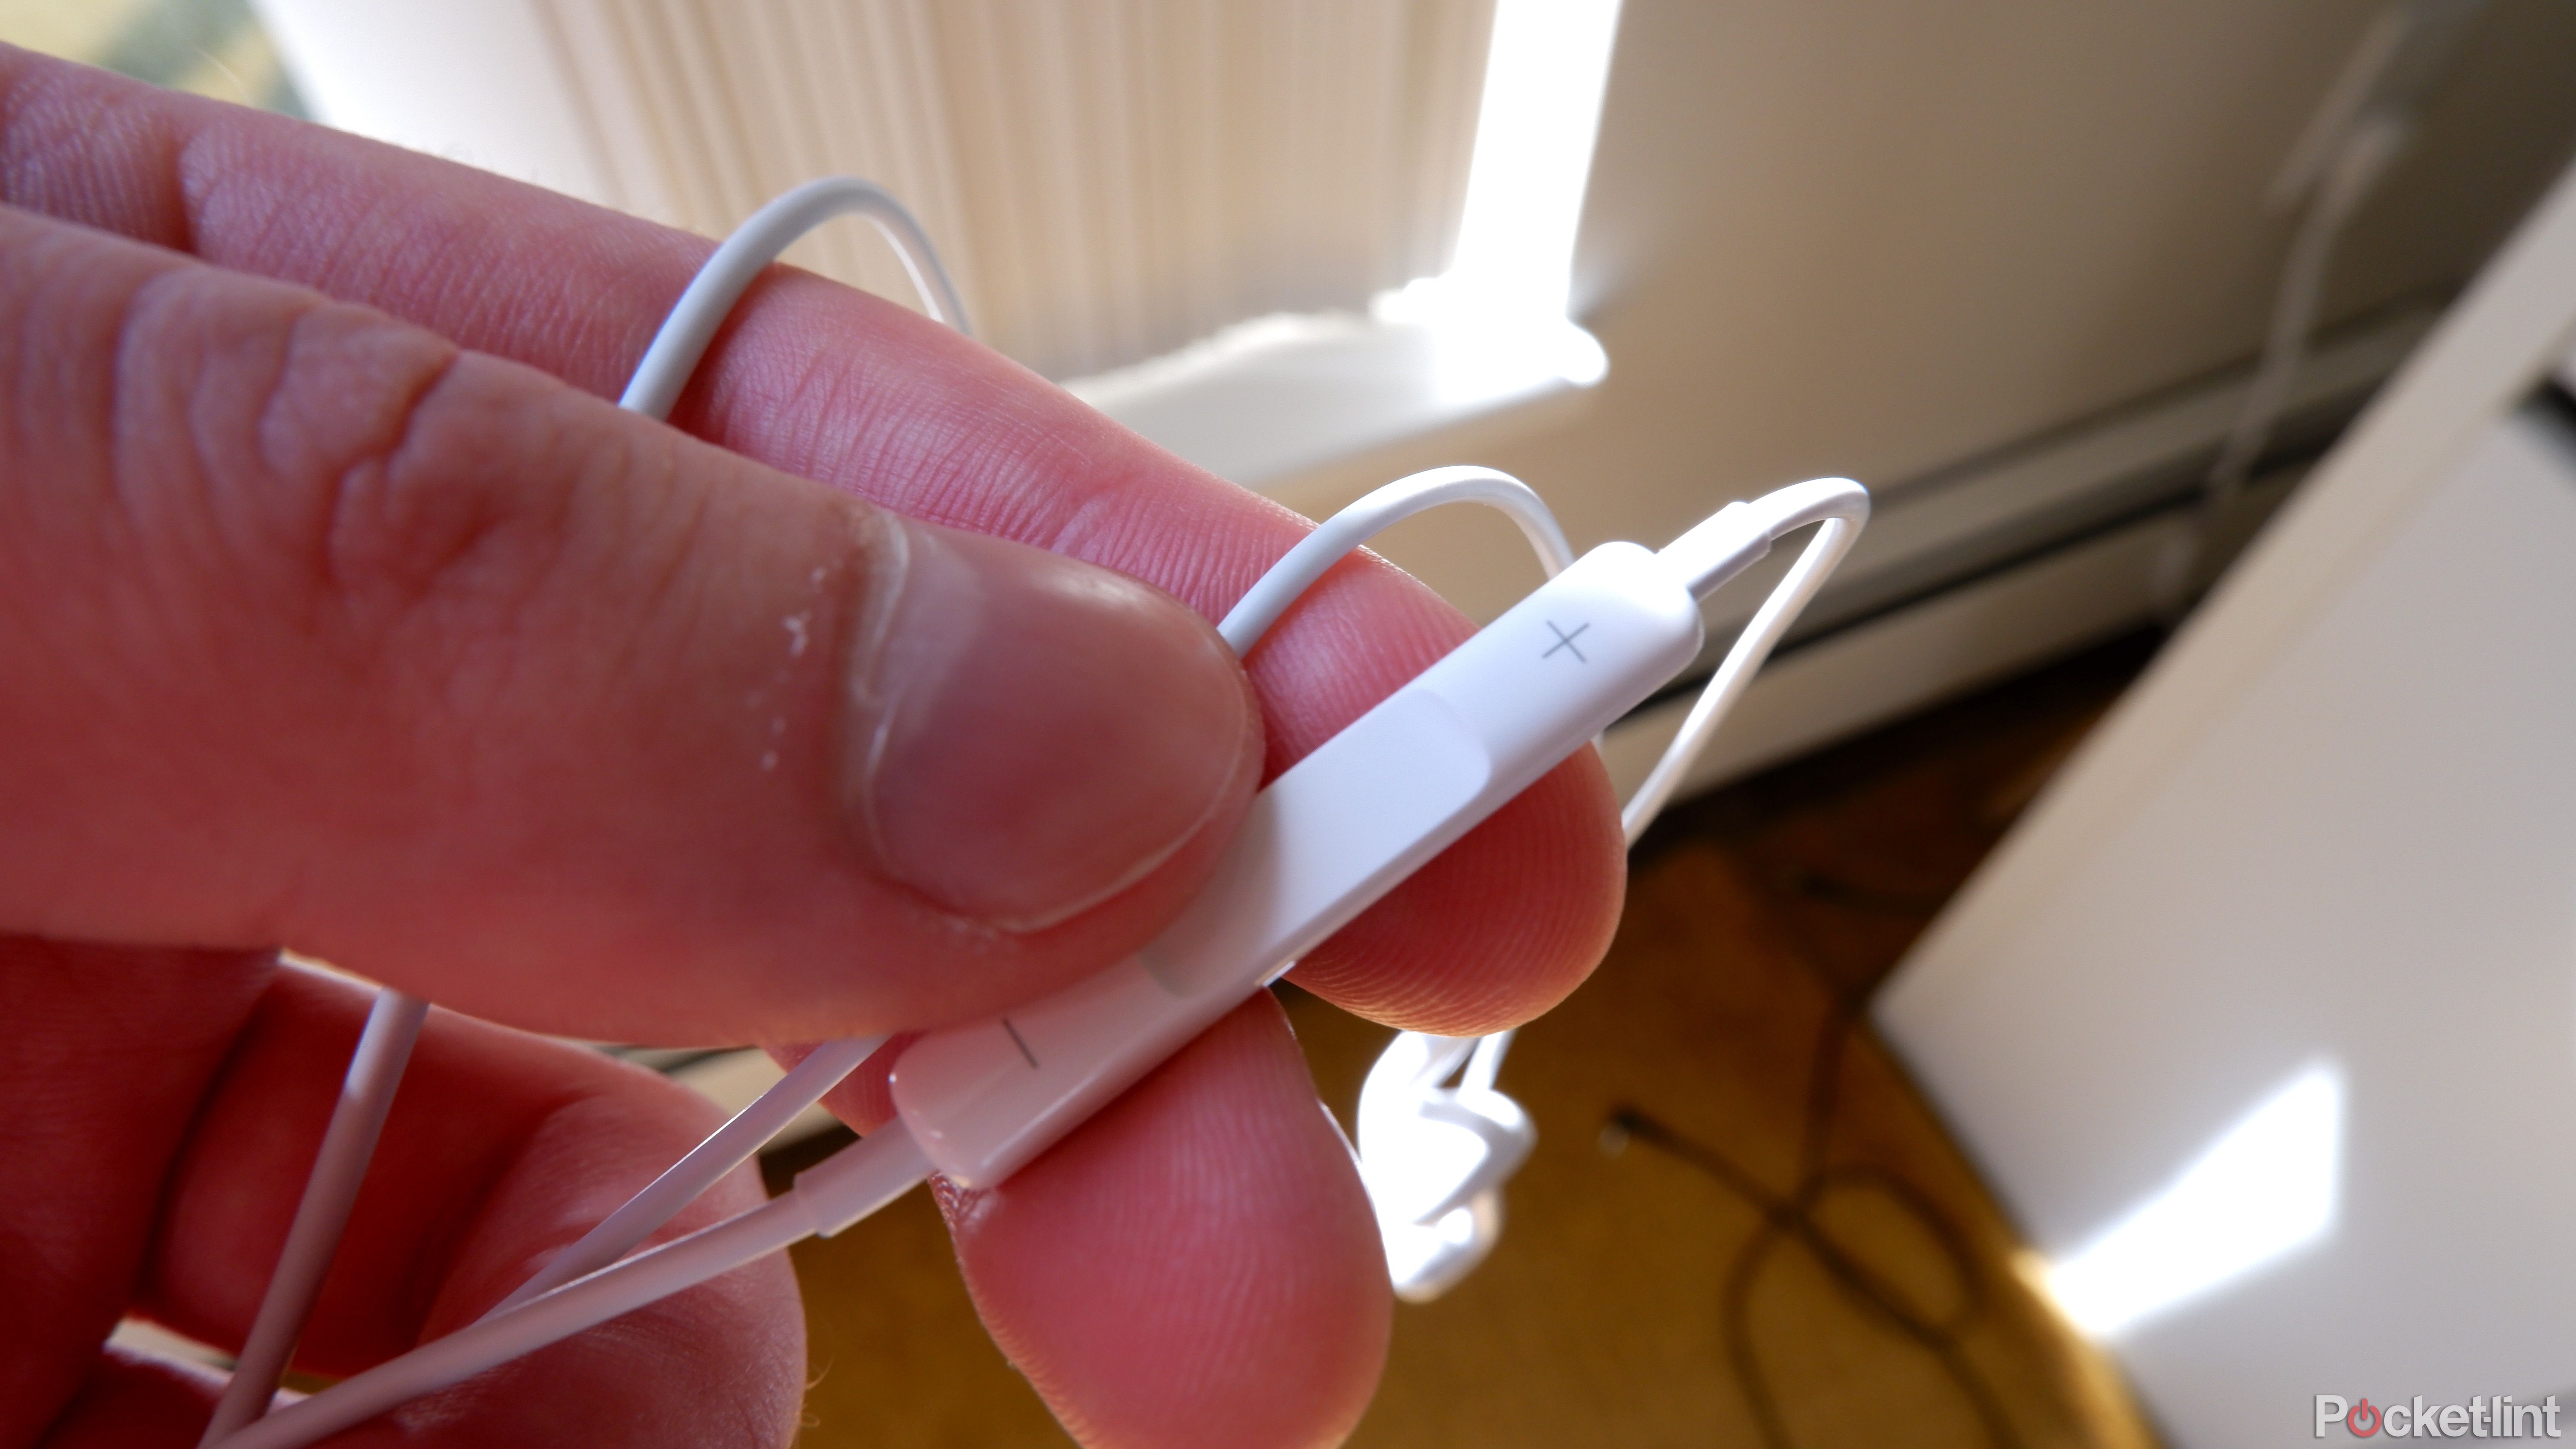 The in-line control part of the EarPods being held in a hand